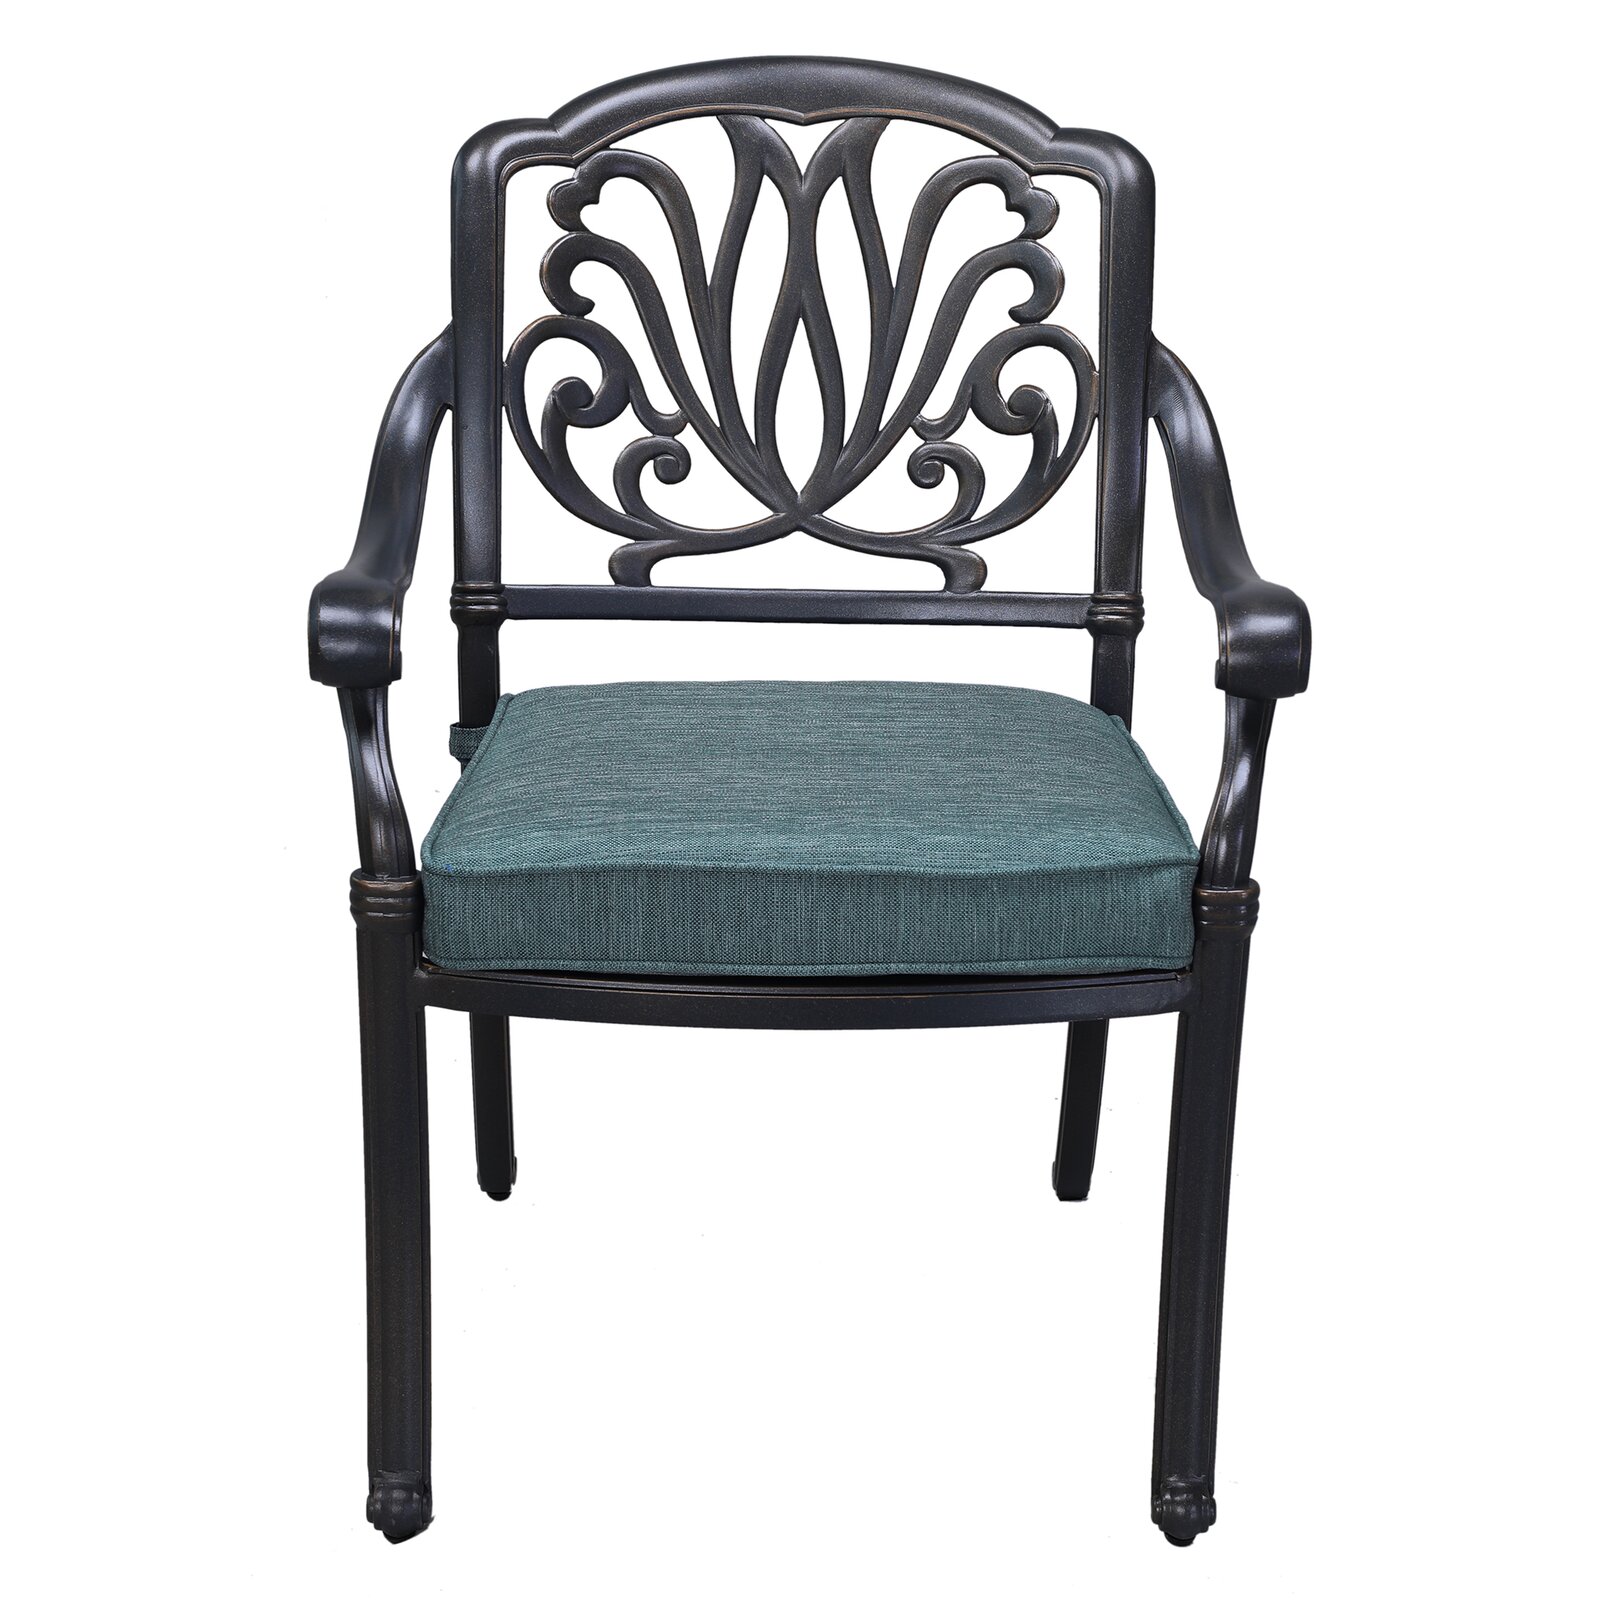 Kilmer Patio Dining Chair with Cushion, Seat: 16" H, Stacking: Yes - image 1 of 4